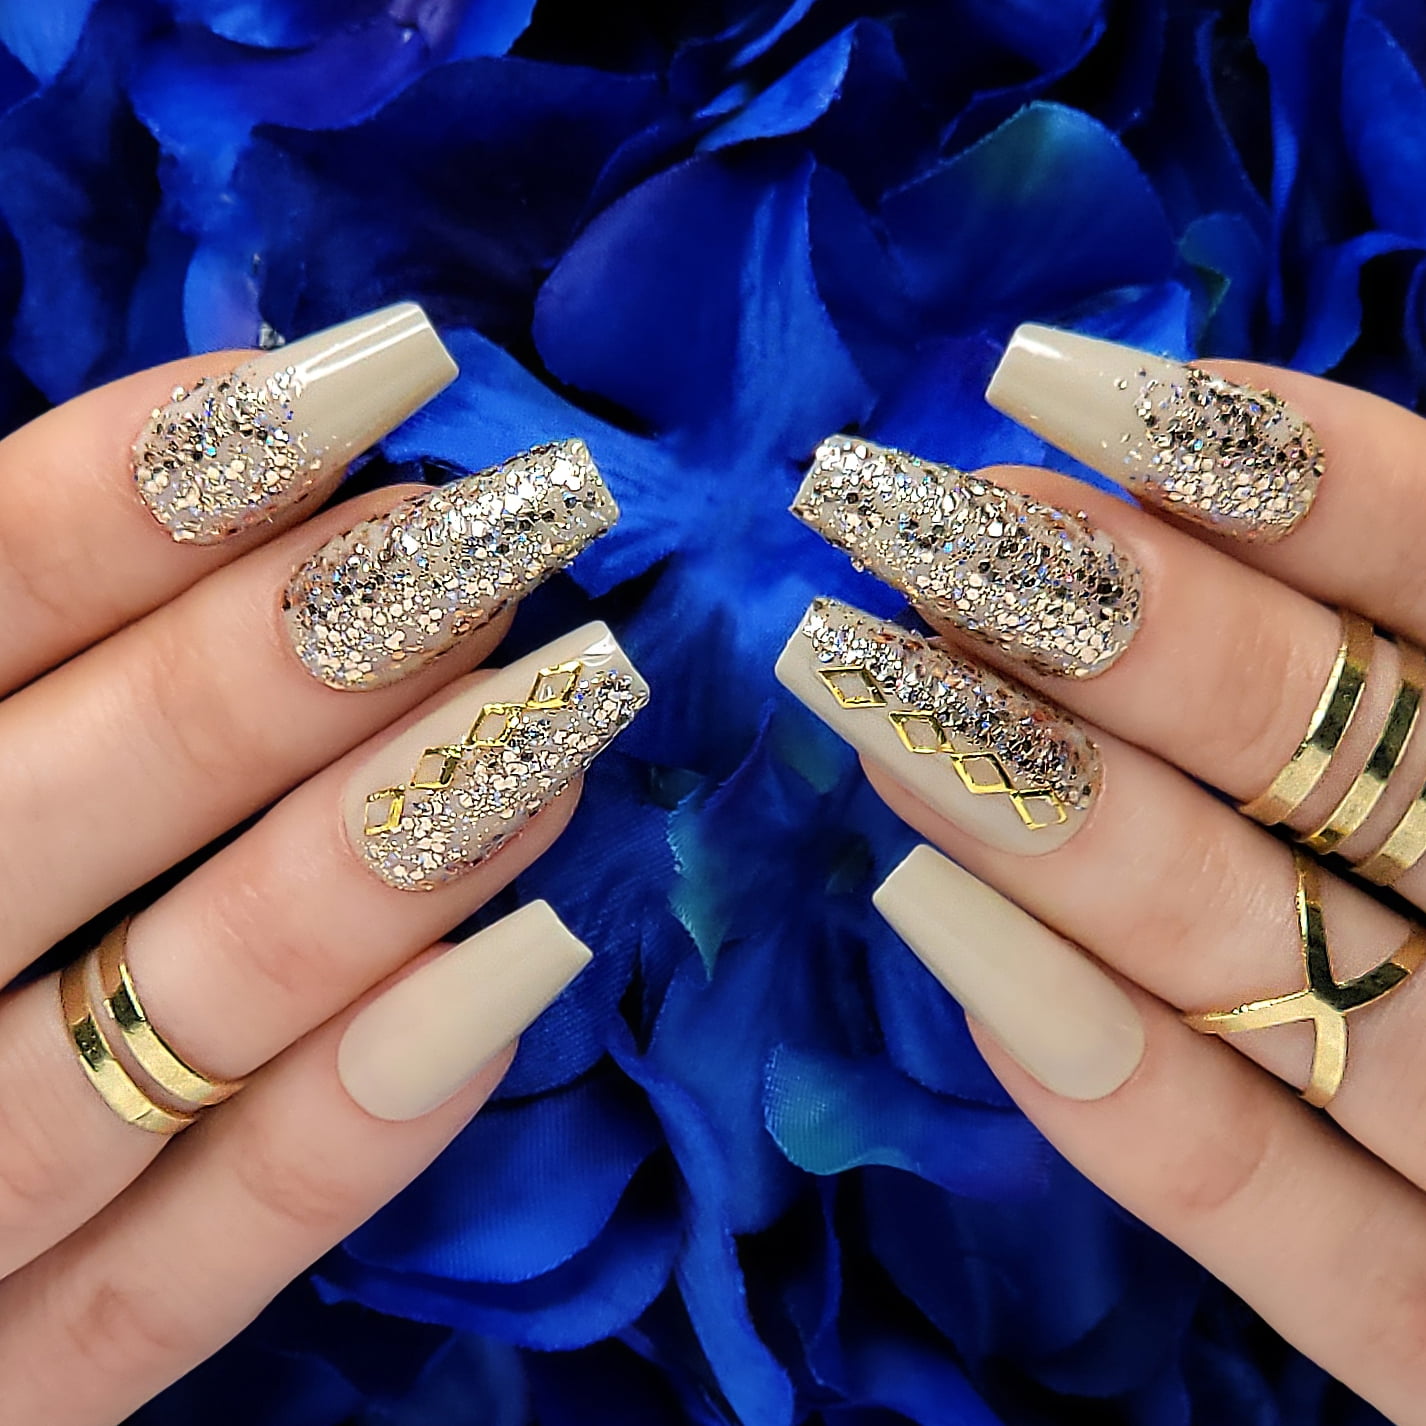 Luxury Gold Stone Coffin Nails – The Nail Event